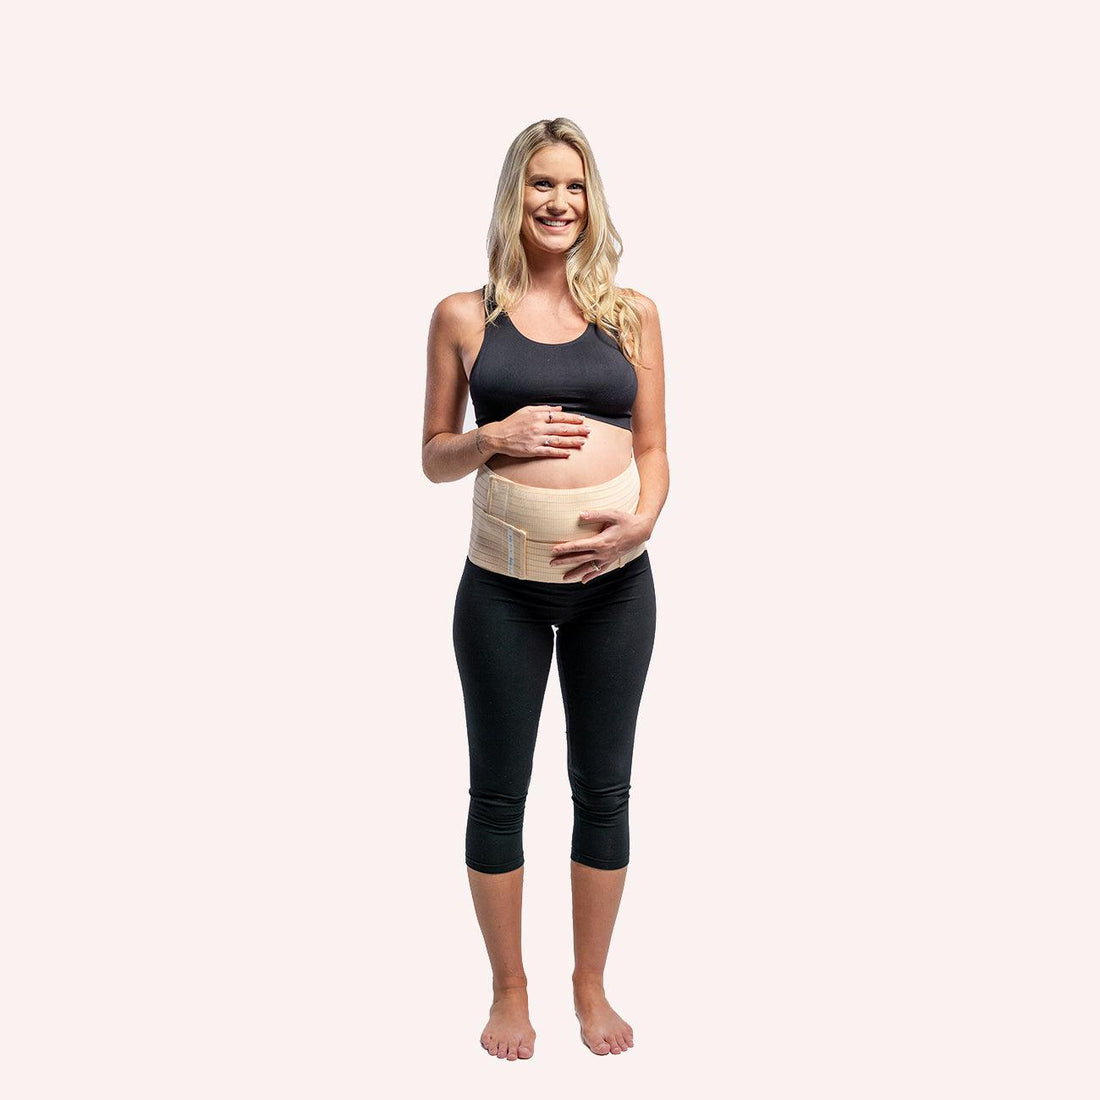 Kayla Itsines - I've been wearing beyond yoga maternity leggings (the most  comfortable ever) and shorts and that's about it when it comes to maternity  wear! I have just been buying bigger